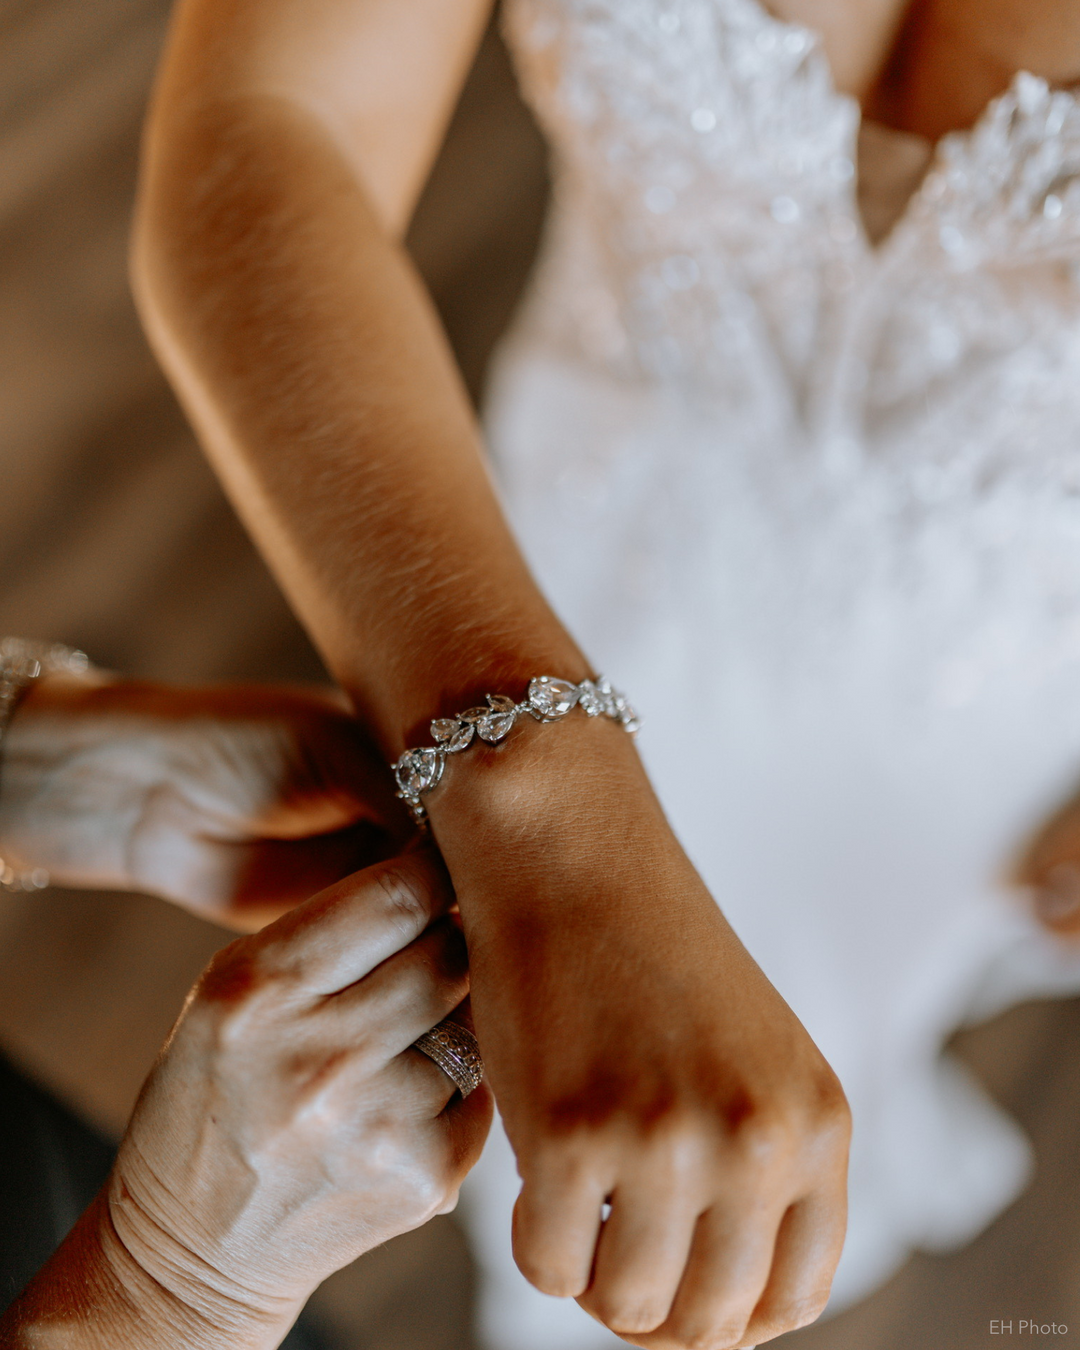 Bride on her wedding day wearing a cubic zirconia bracelet that sparkles like real diamonds